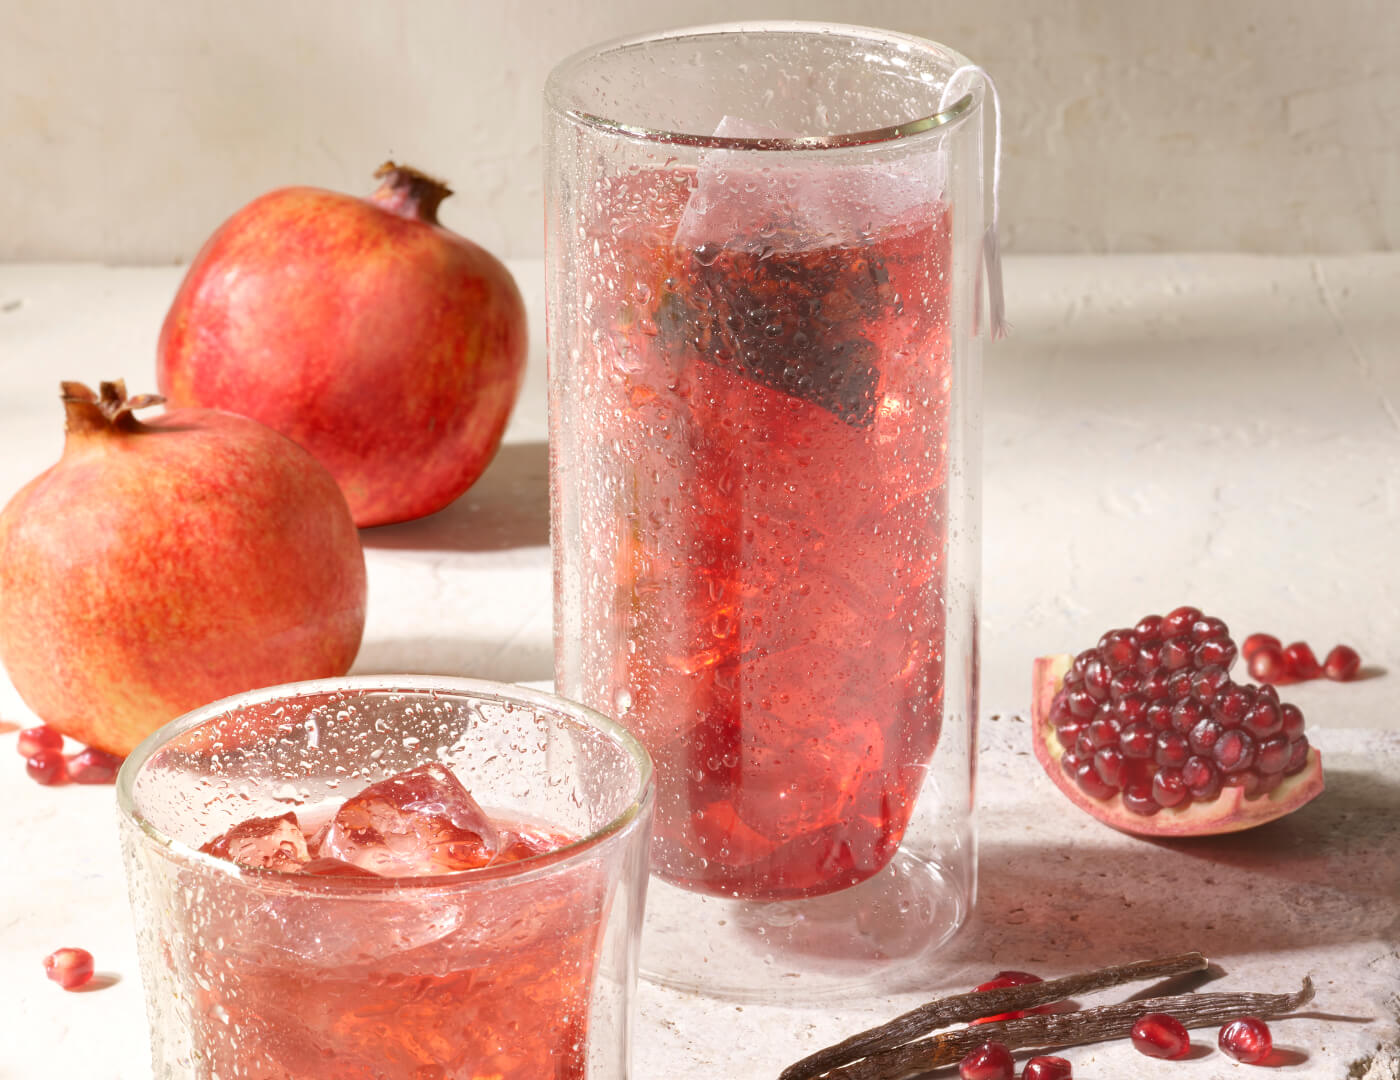 Cold Brew Pomegranate Vanilla sachet steeped in ice water